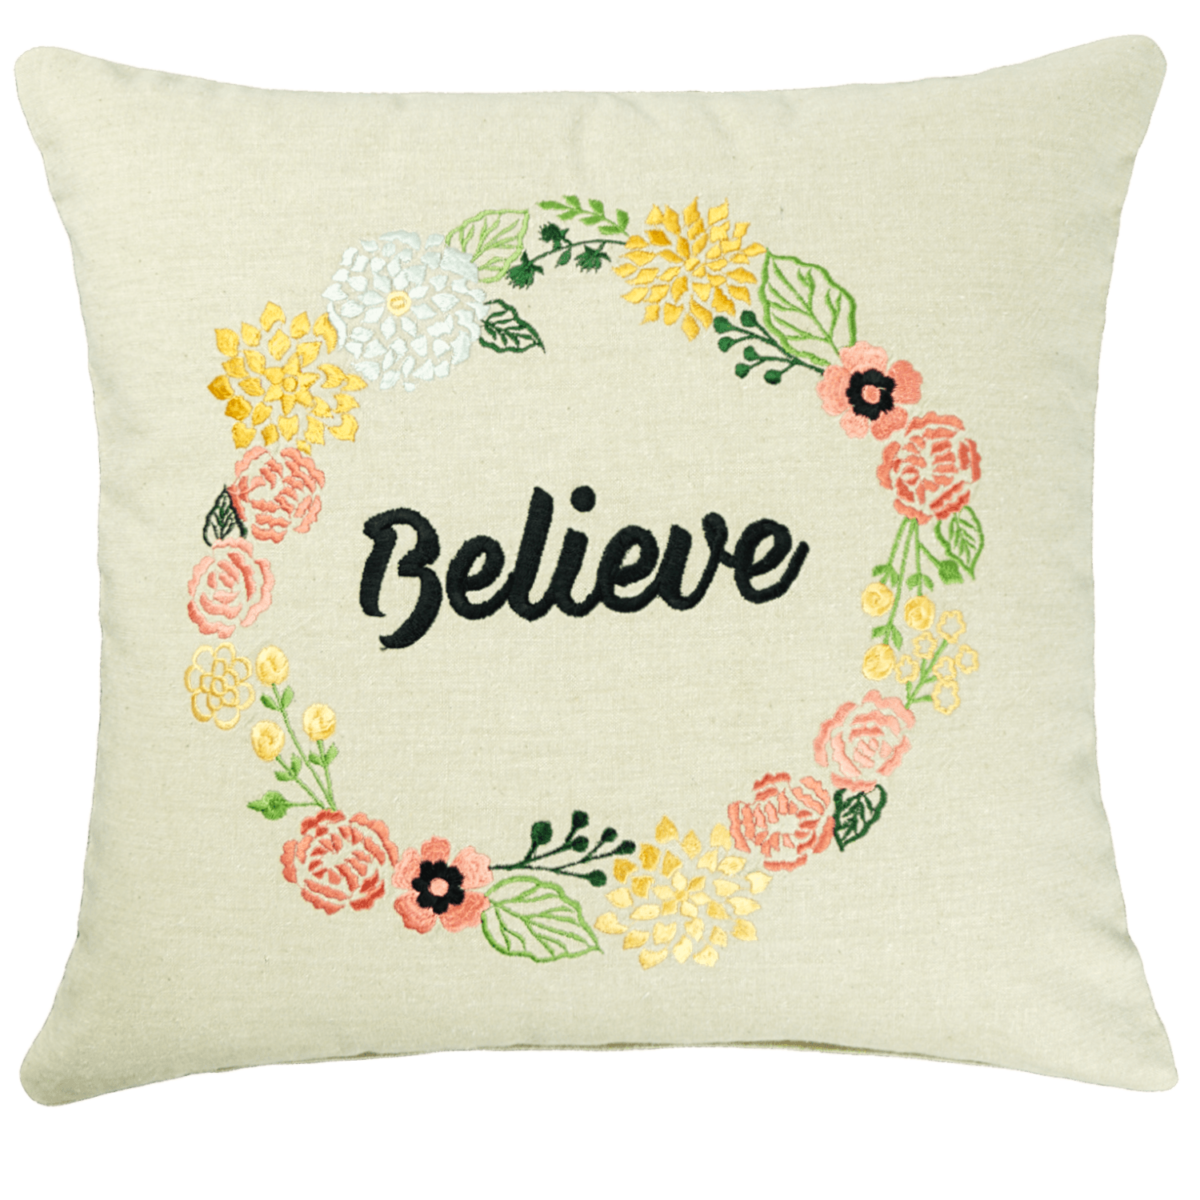 Embroidered flower decorative pillow 16" X 16"